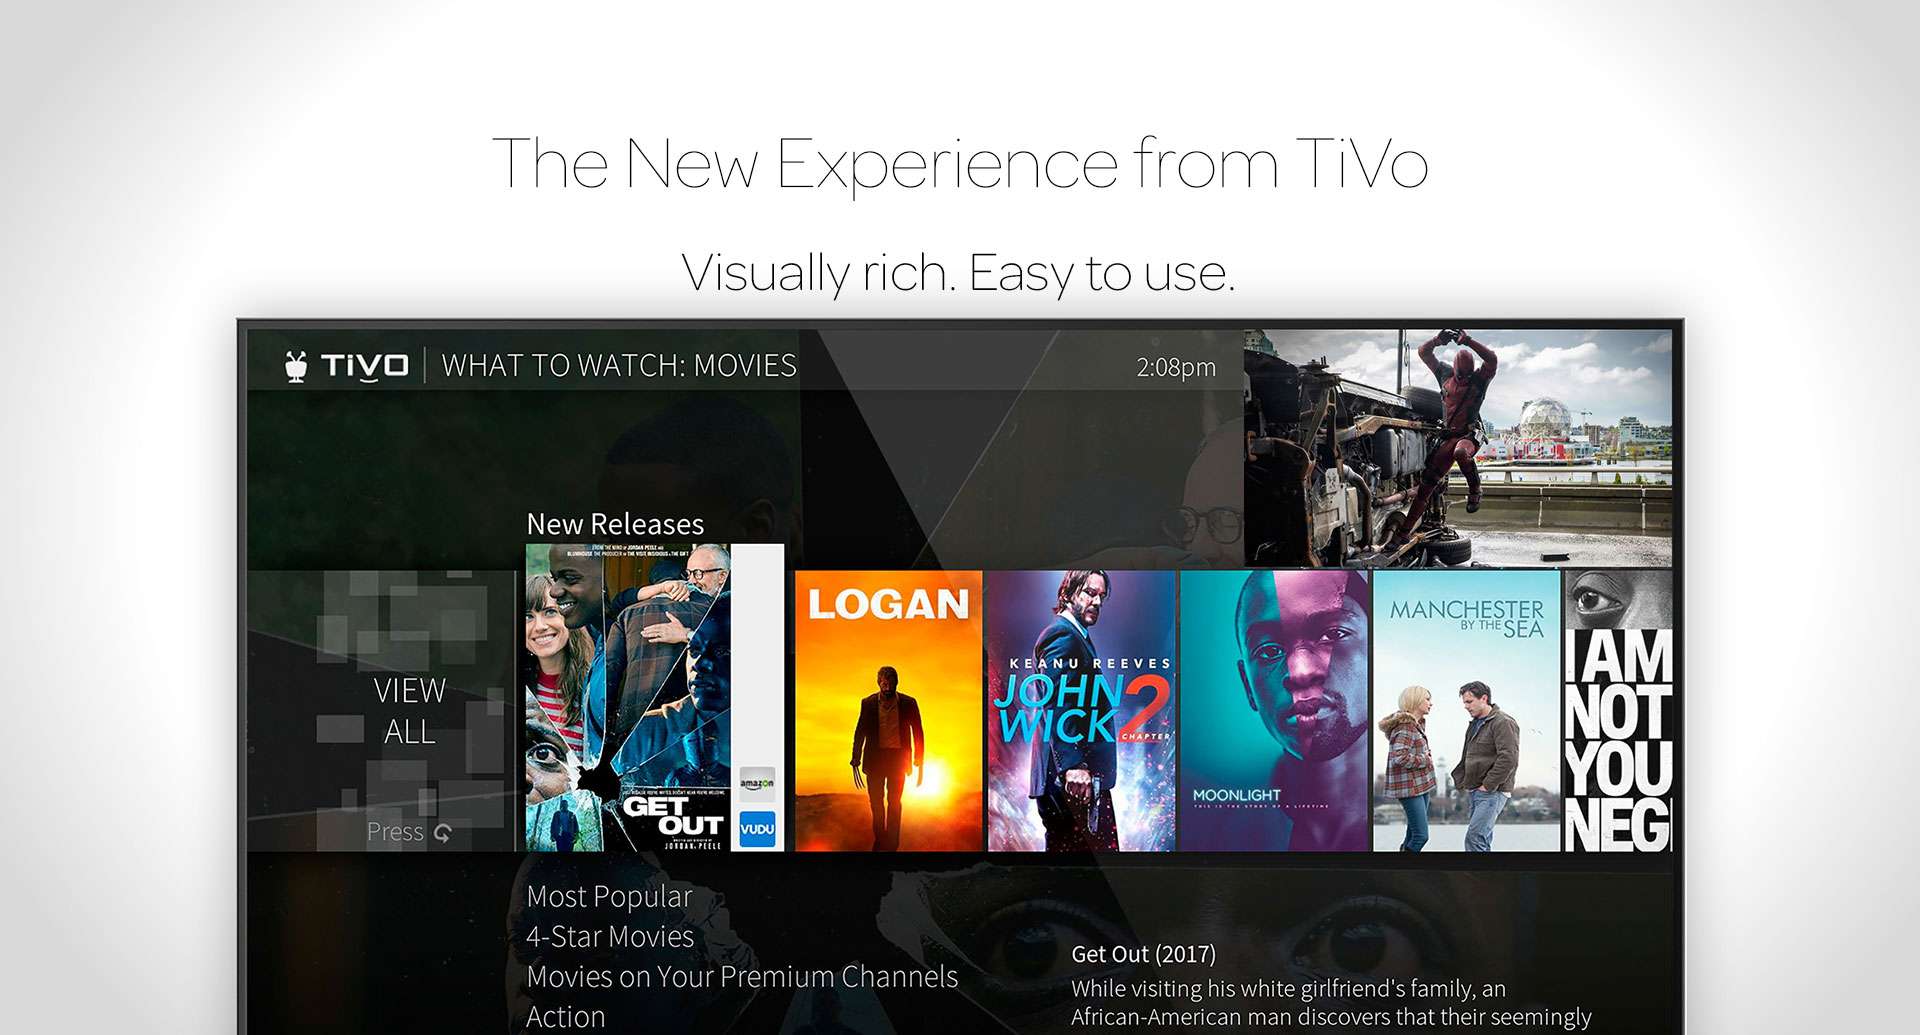 The New Experience from TiVo. Visually rich. Easy to use.